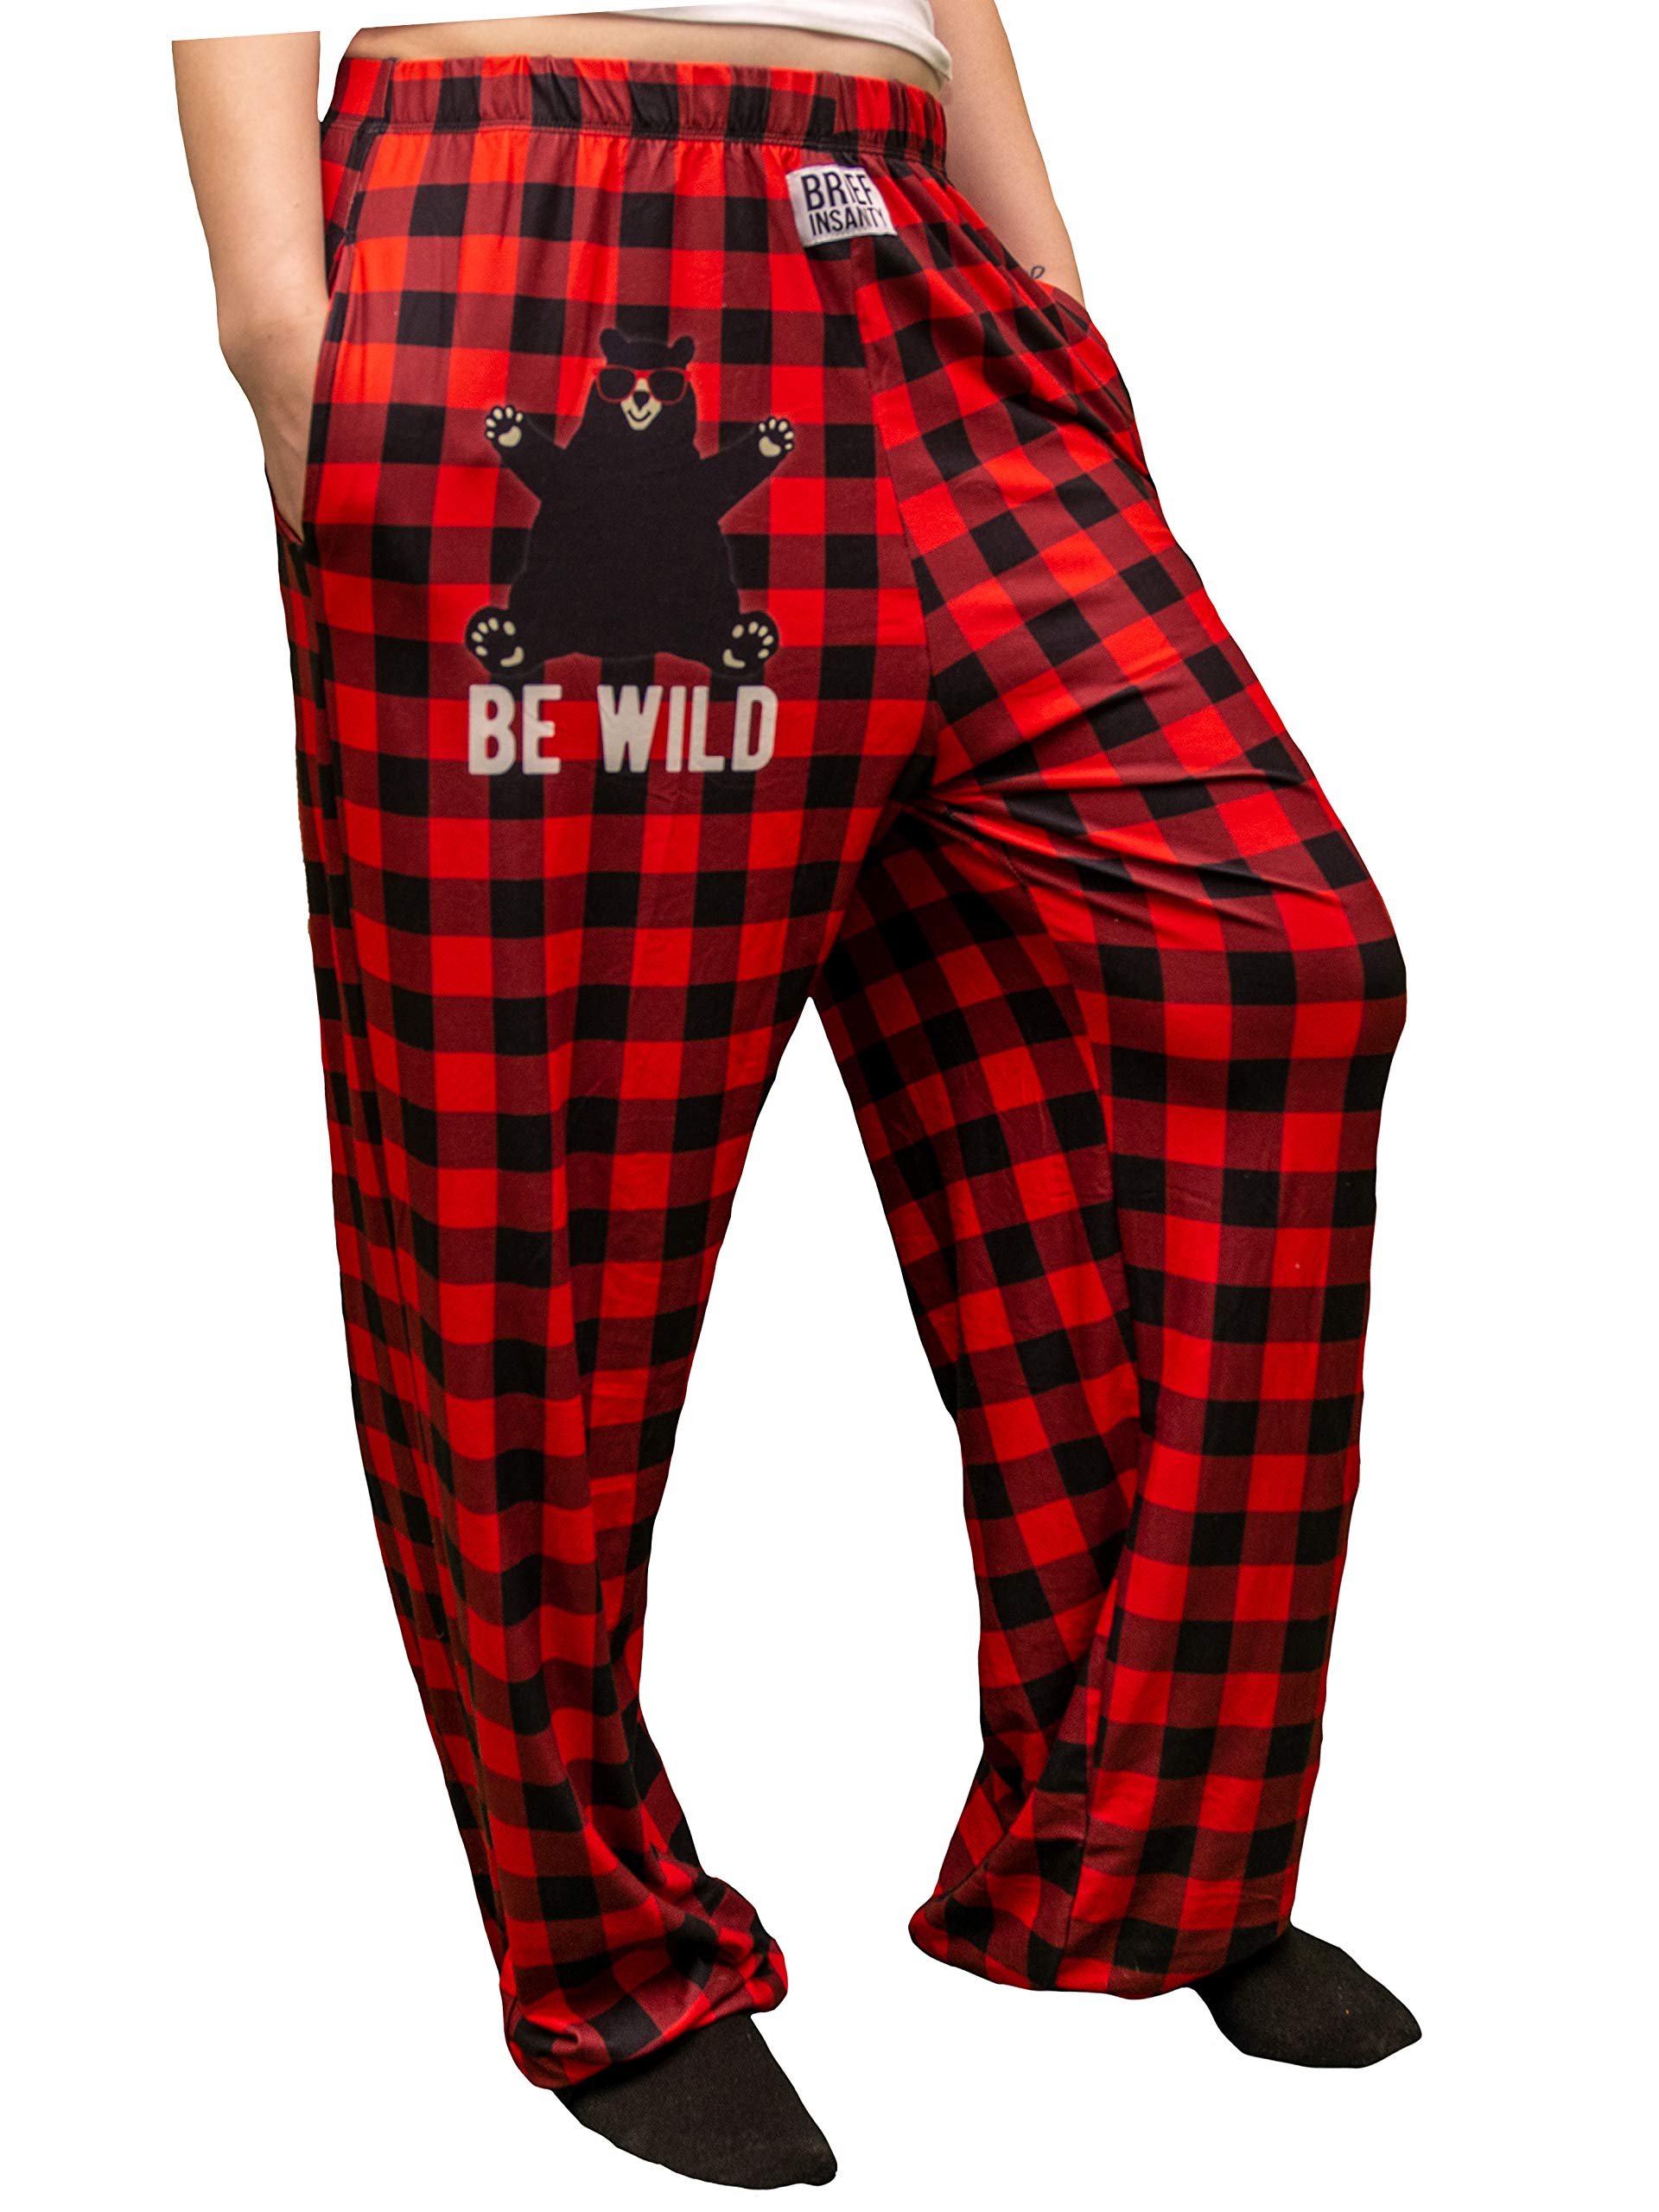 Waist down photo of model wearing Be Wild Red Plaid pajama lounge pants front/side view (white background)